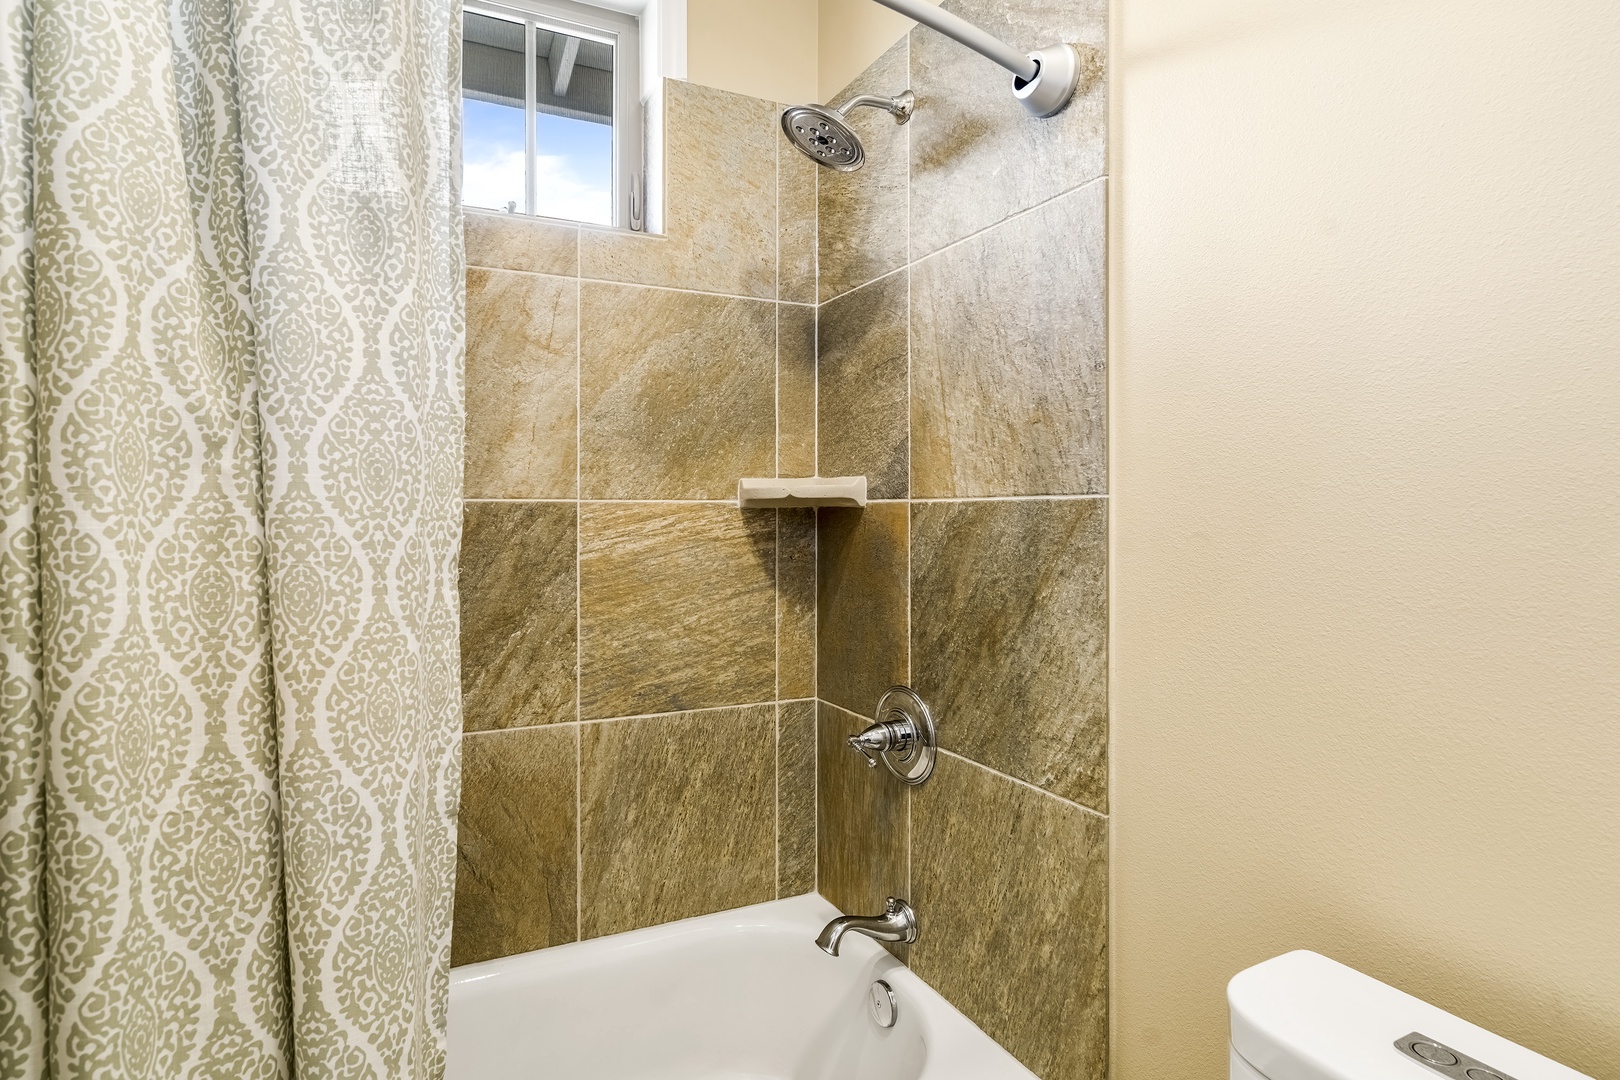 Kailua Kona Vacation Rentals, Green/Blue Combo - Tub / shower combo in the upstairs guest bathroom